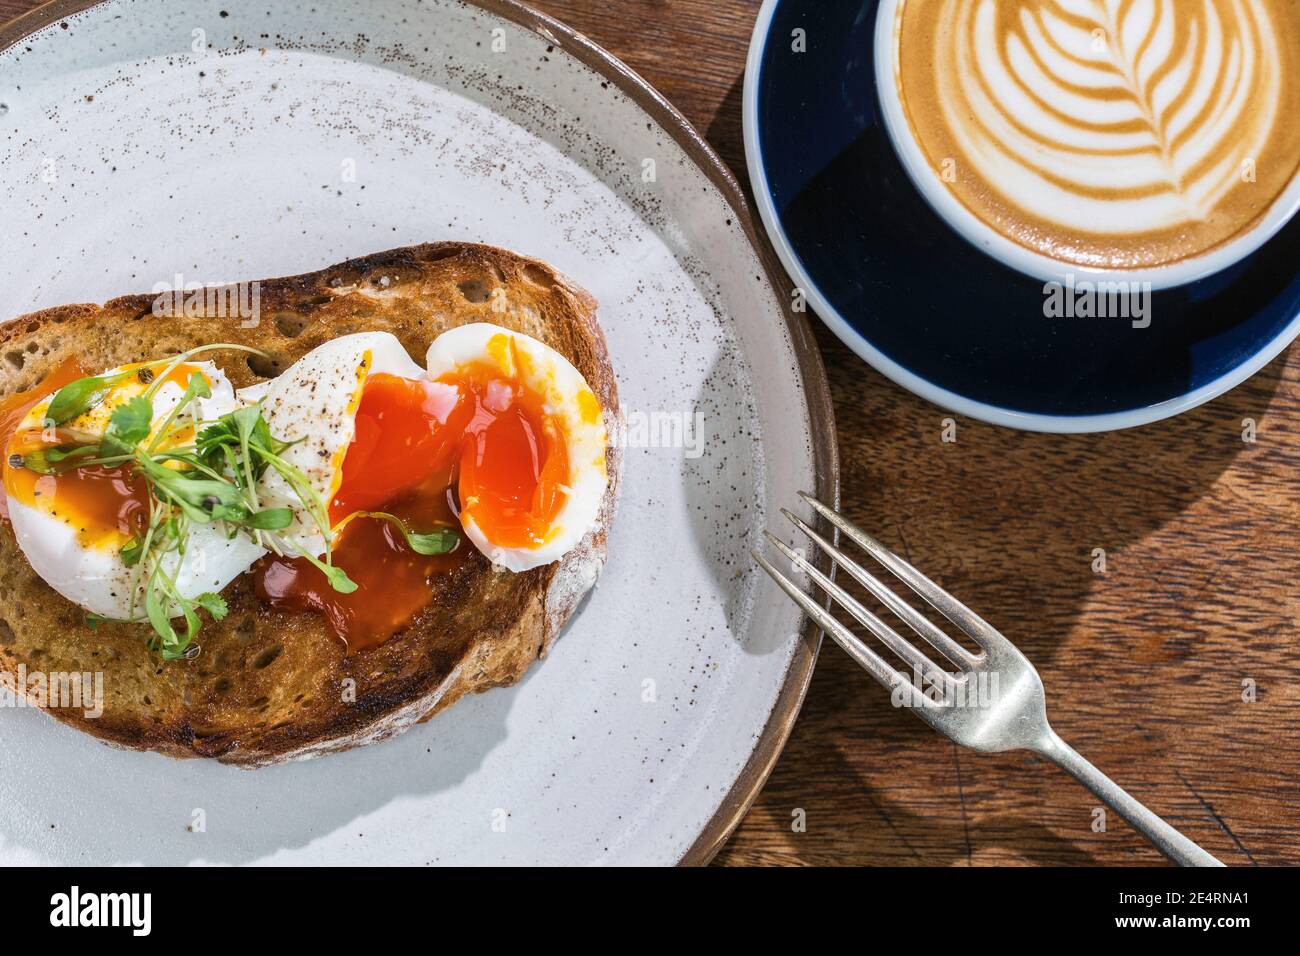 A cup of coffee with latte art on top, toasted sourdough bread with Poached egg on table in caffee. Stock Photo